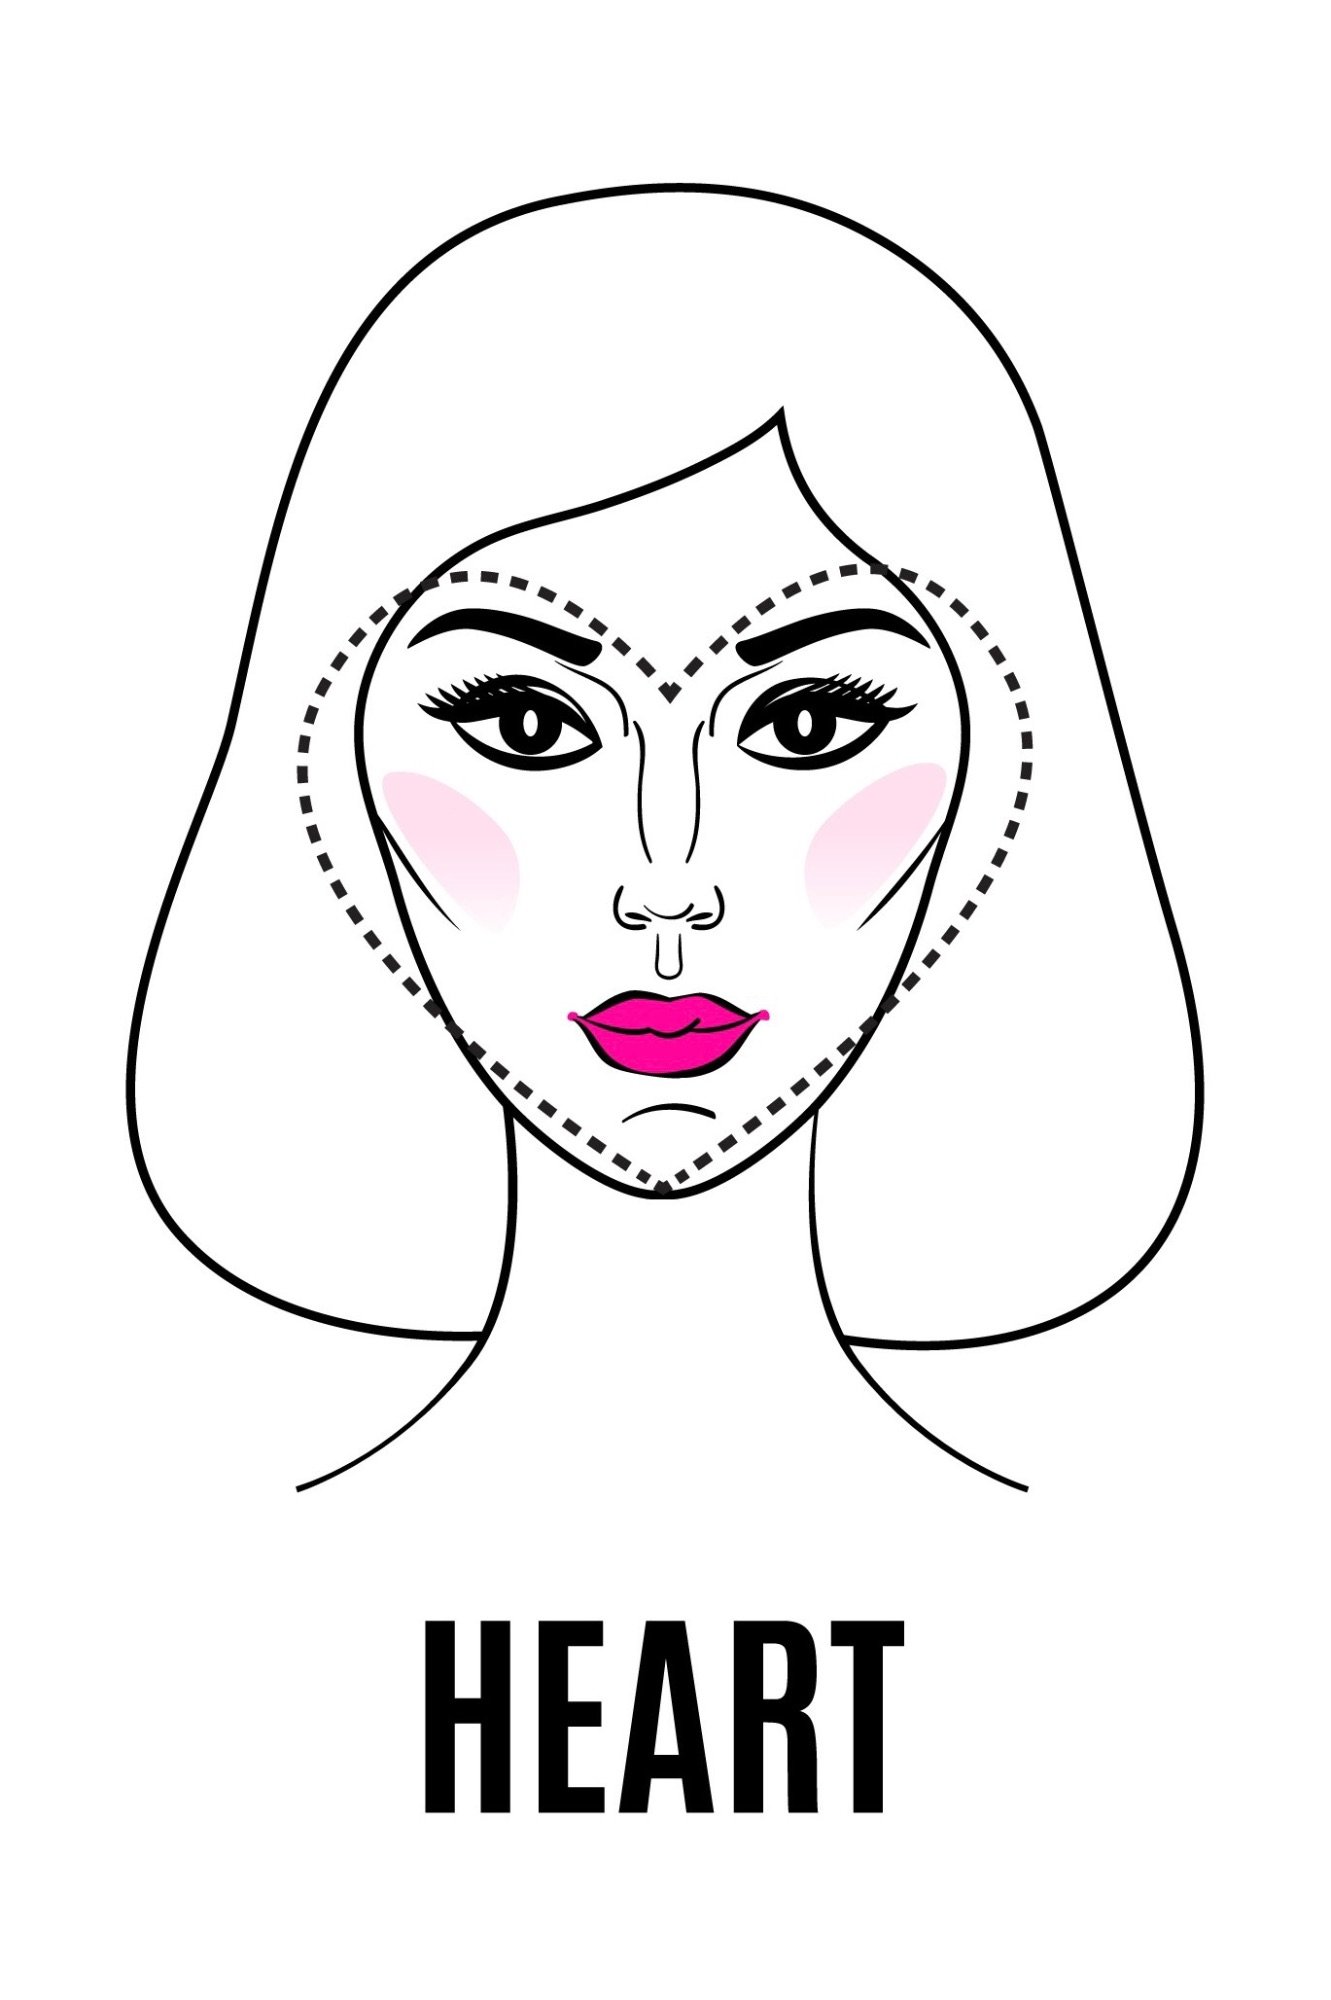 Drawing of a heart-shaped face